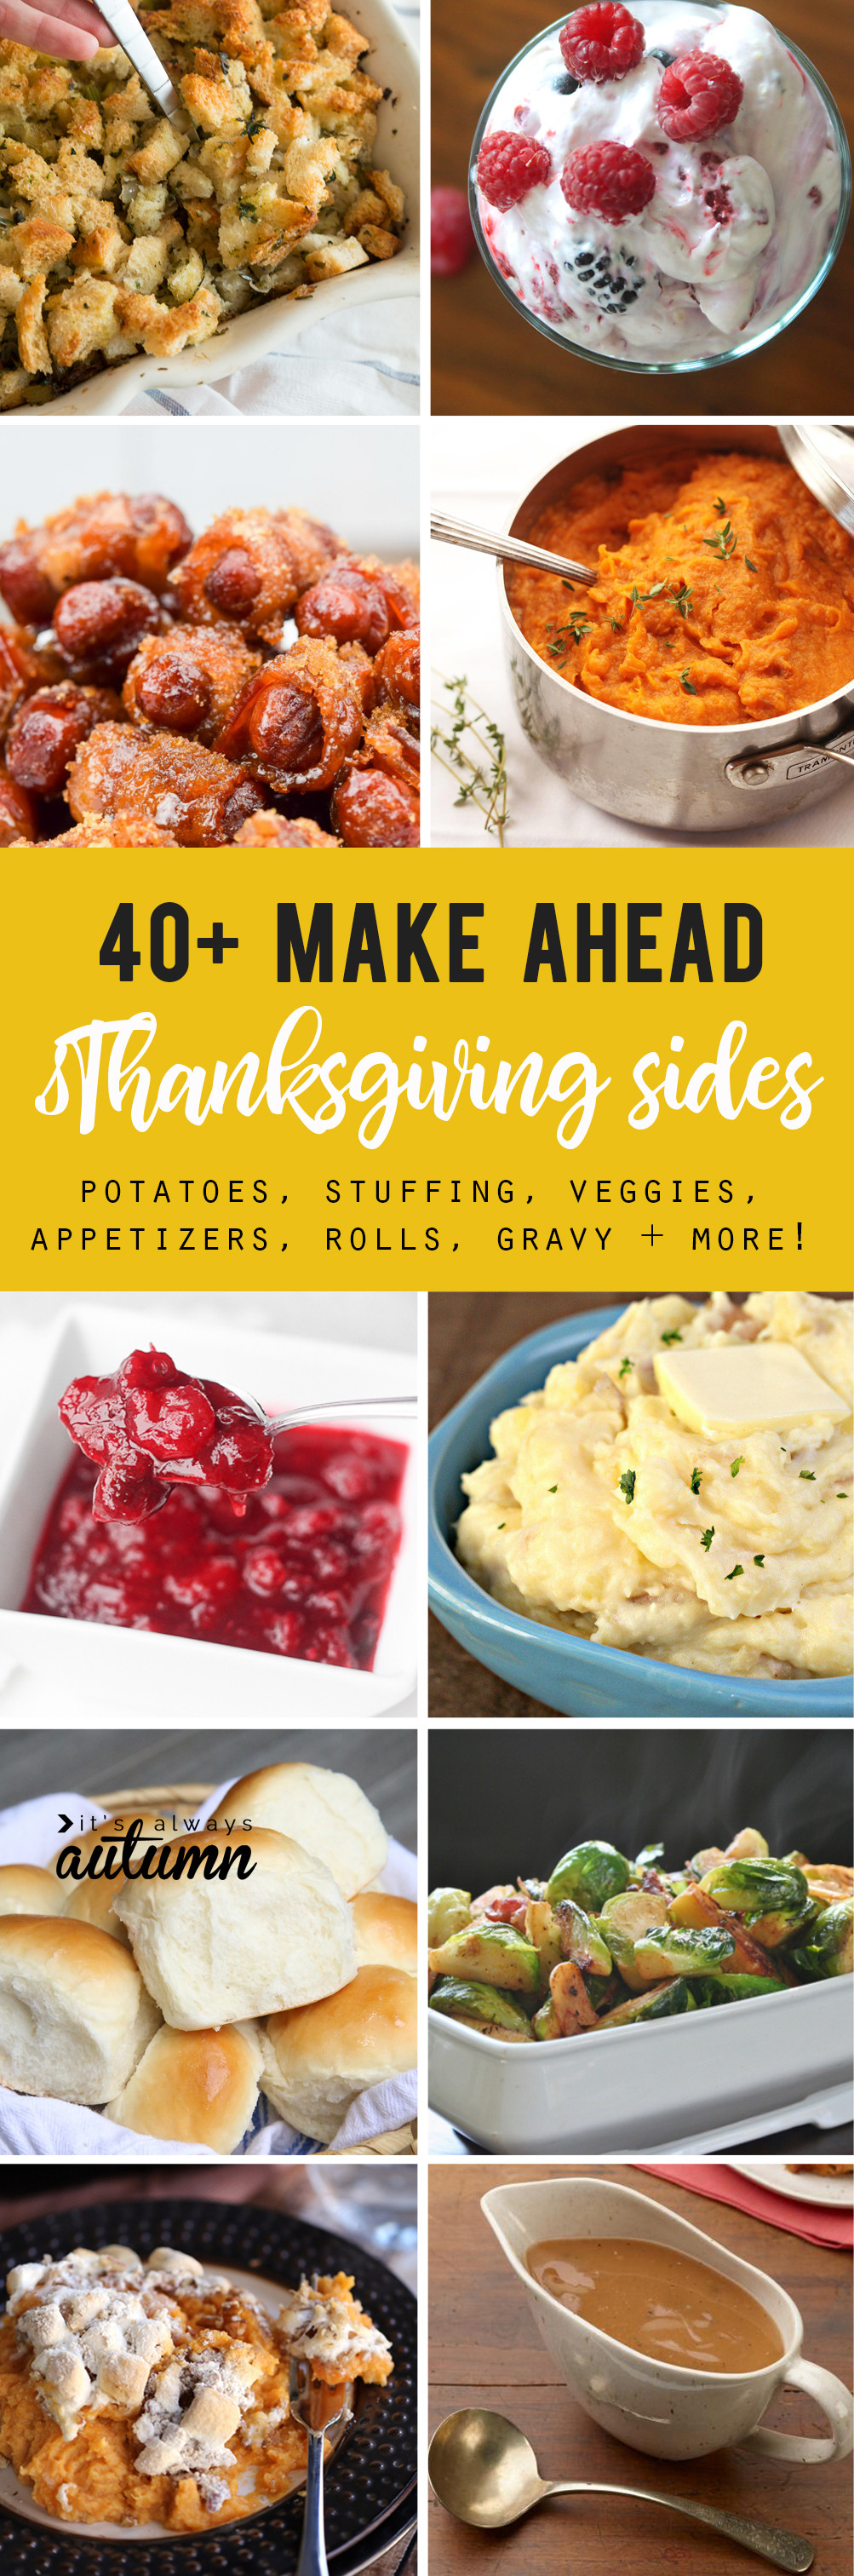 Make Ahead Thanksgiving
 the BEST LIST of Thanksgiving side dishes you can make